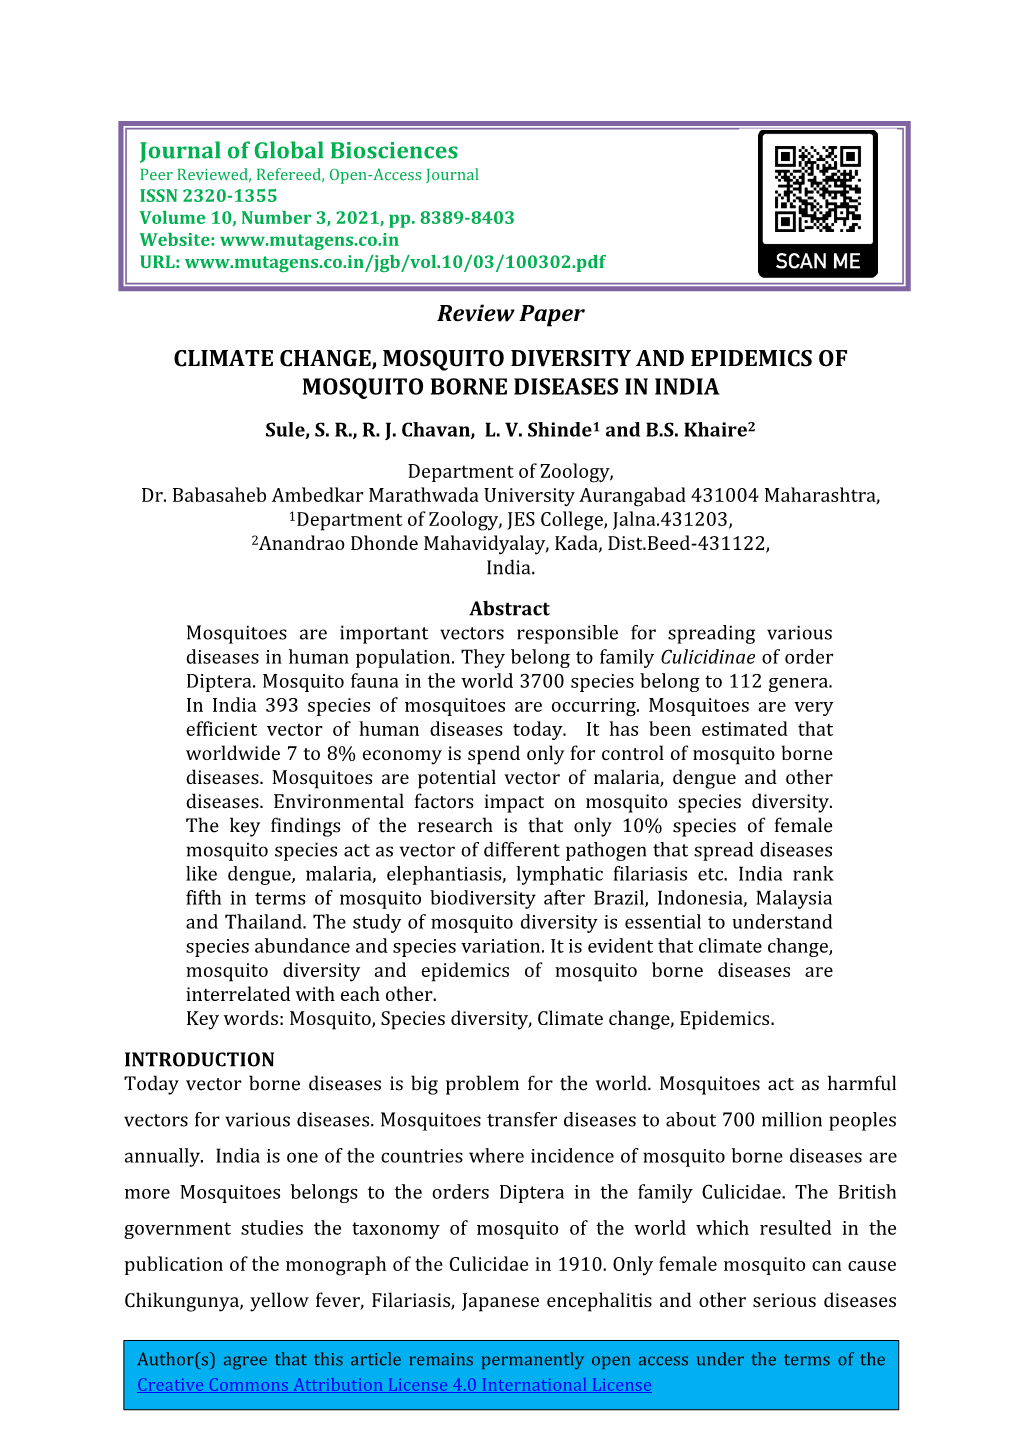 Review Paper CLIMATE CHANGE, MOSQUITO DIVERSITY and EPIDEMICS of MOSQUITO BORNE DISEASES in INDIA